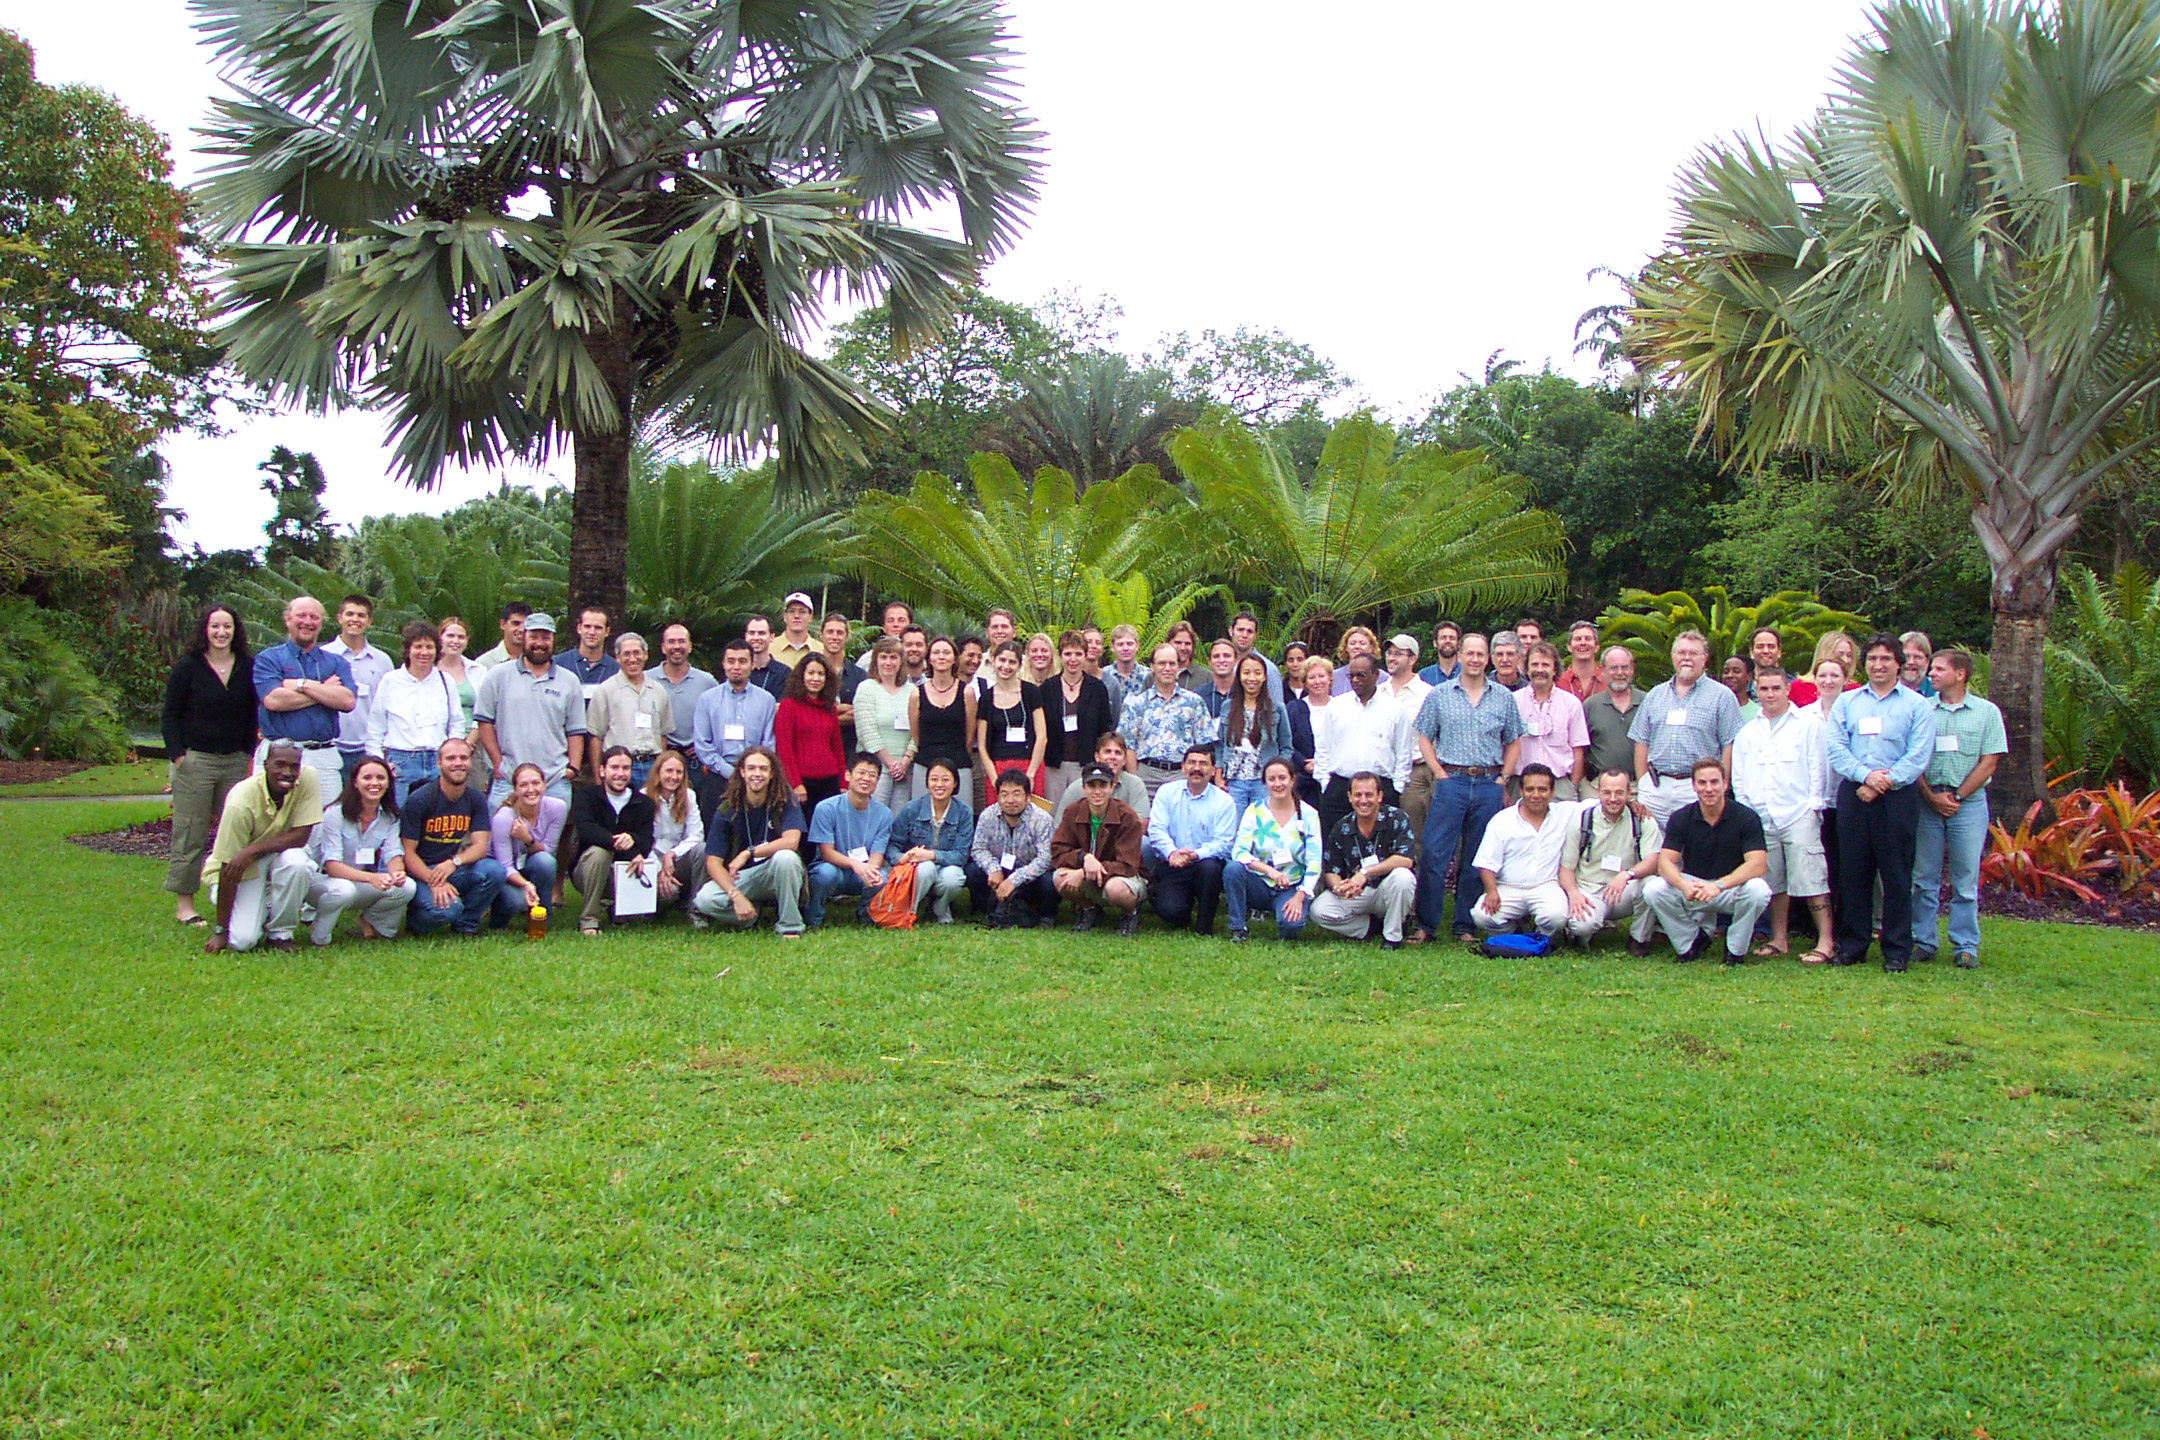 Group photo from the 2004 Florida Coastal Everglades LTER All Scientists Meeting